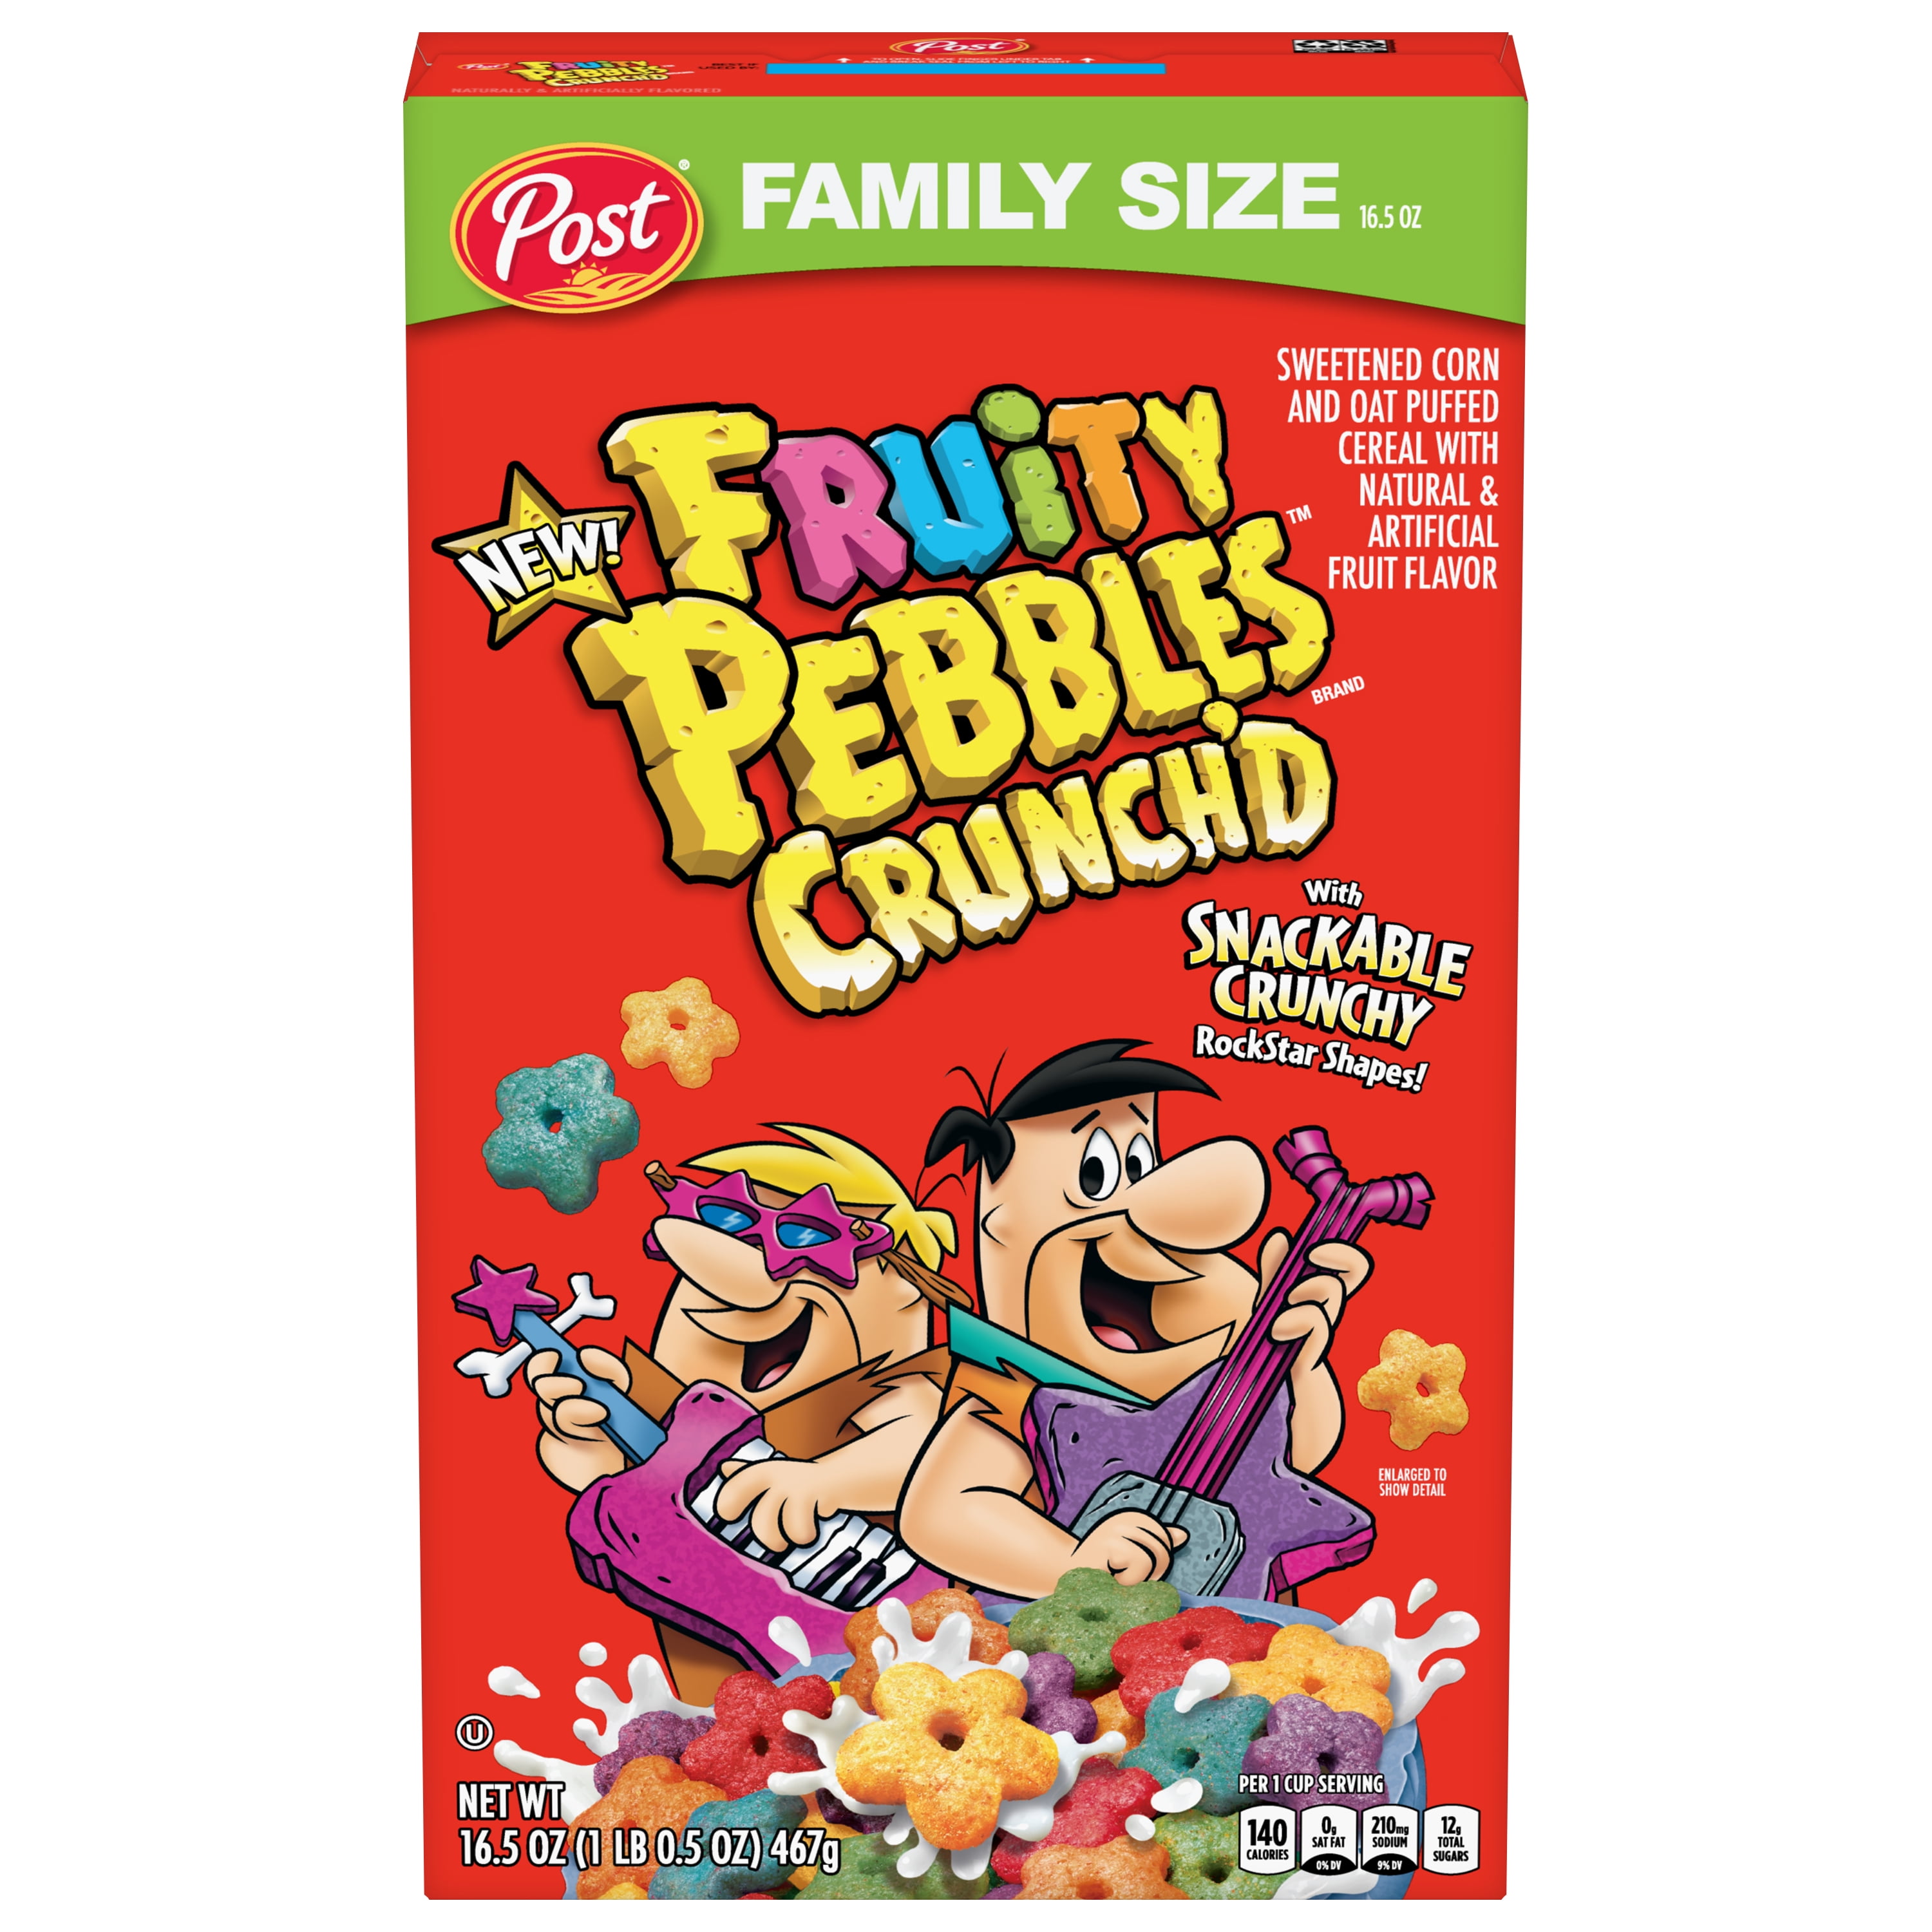 Post Fruity PEBBLES Crunch'D Breakfast Cereal, Fruity Family Size Cereal, 16.5 OZ Box